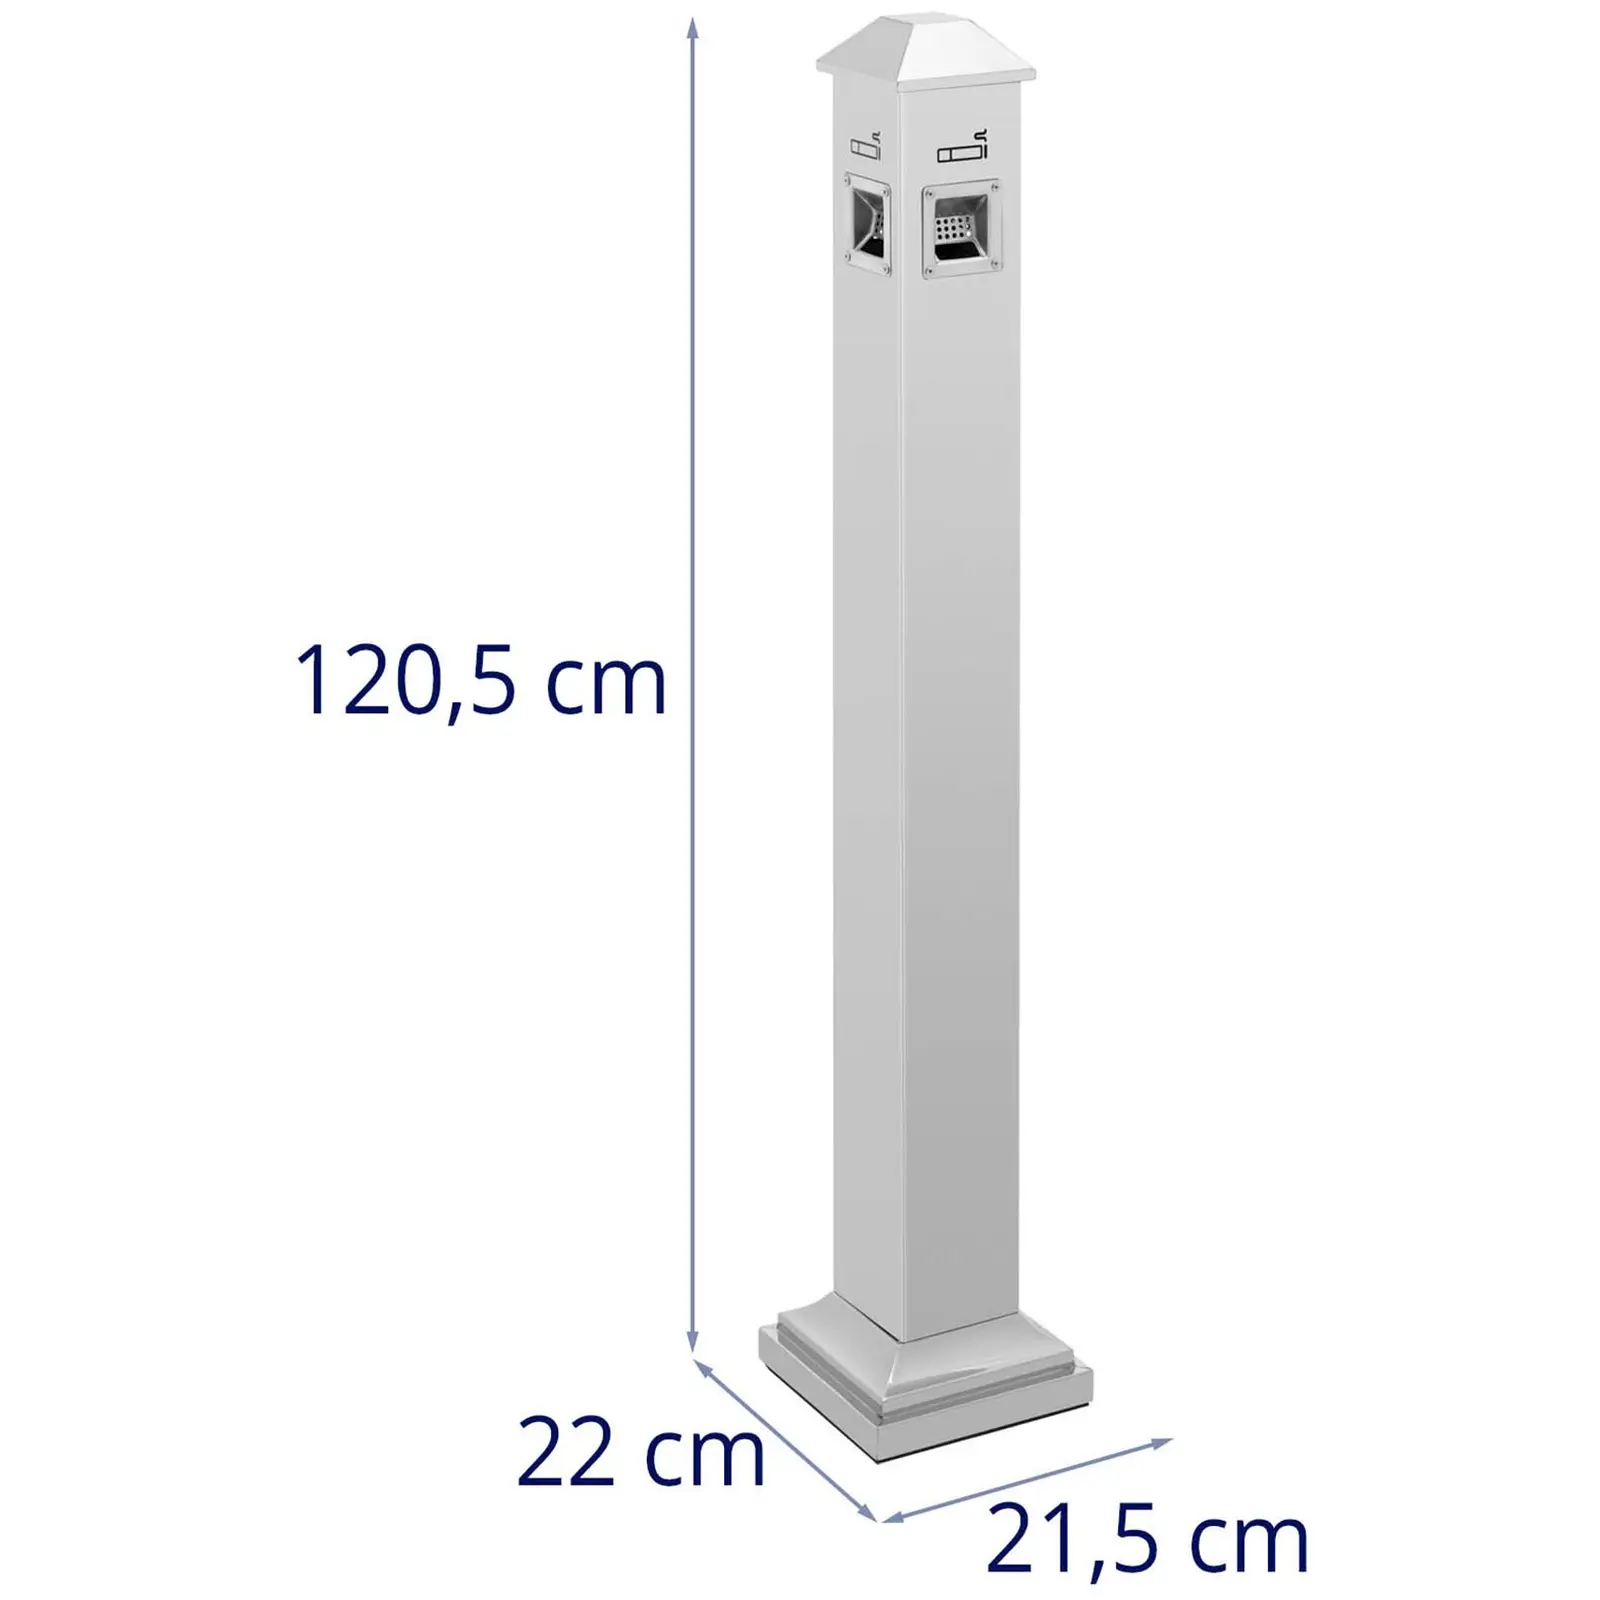 Outdoor Standing Ashtray - for outdoors & indoors - lockable - 22 x 21.5 x 120.5 cm